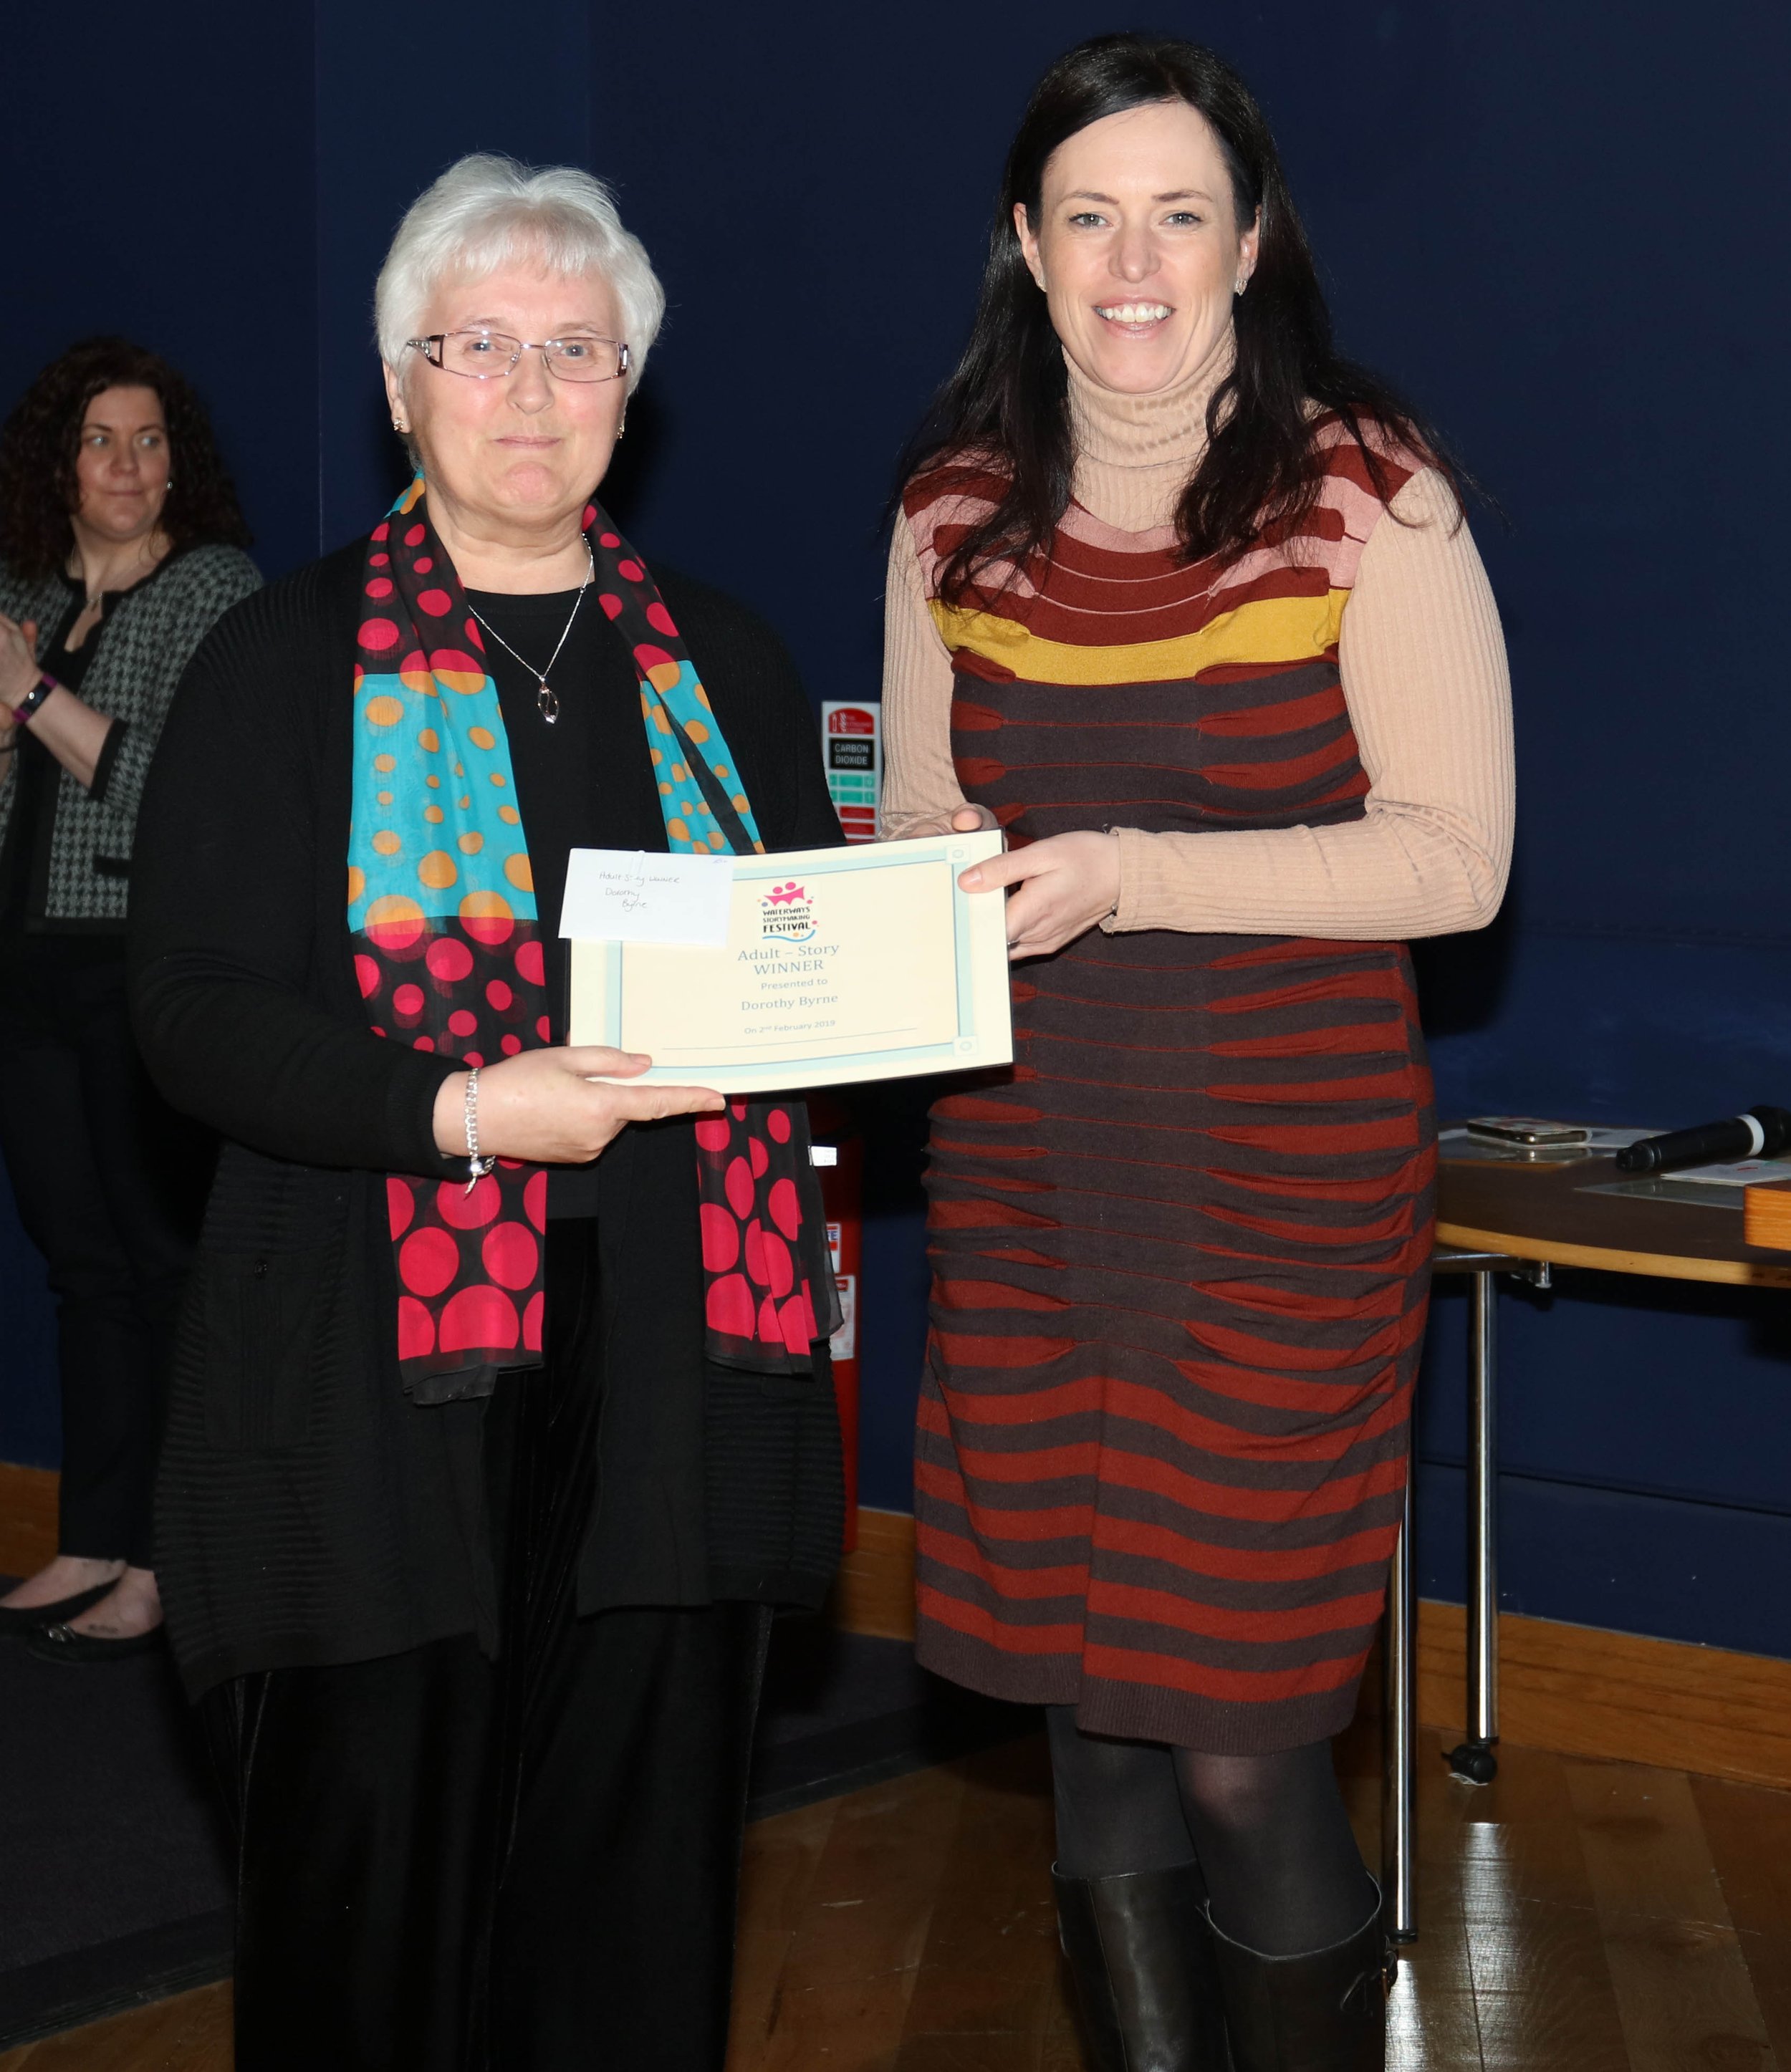 Suzanne Lutton presenting and Dorothy Byrne her competition winners certificate